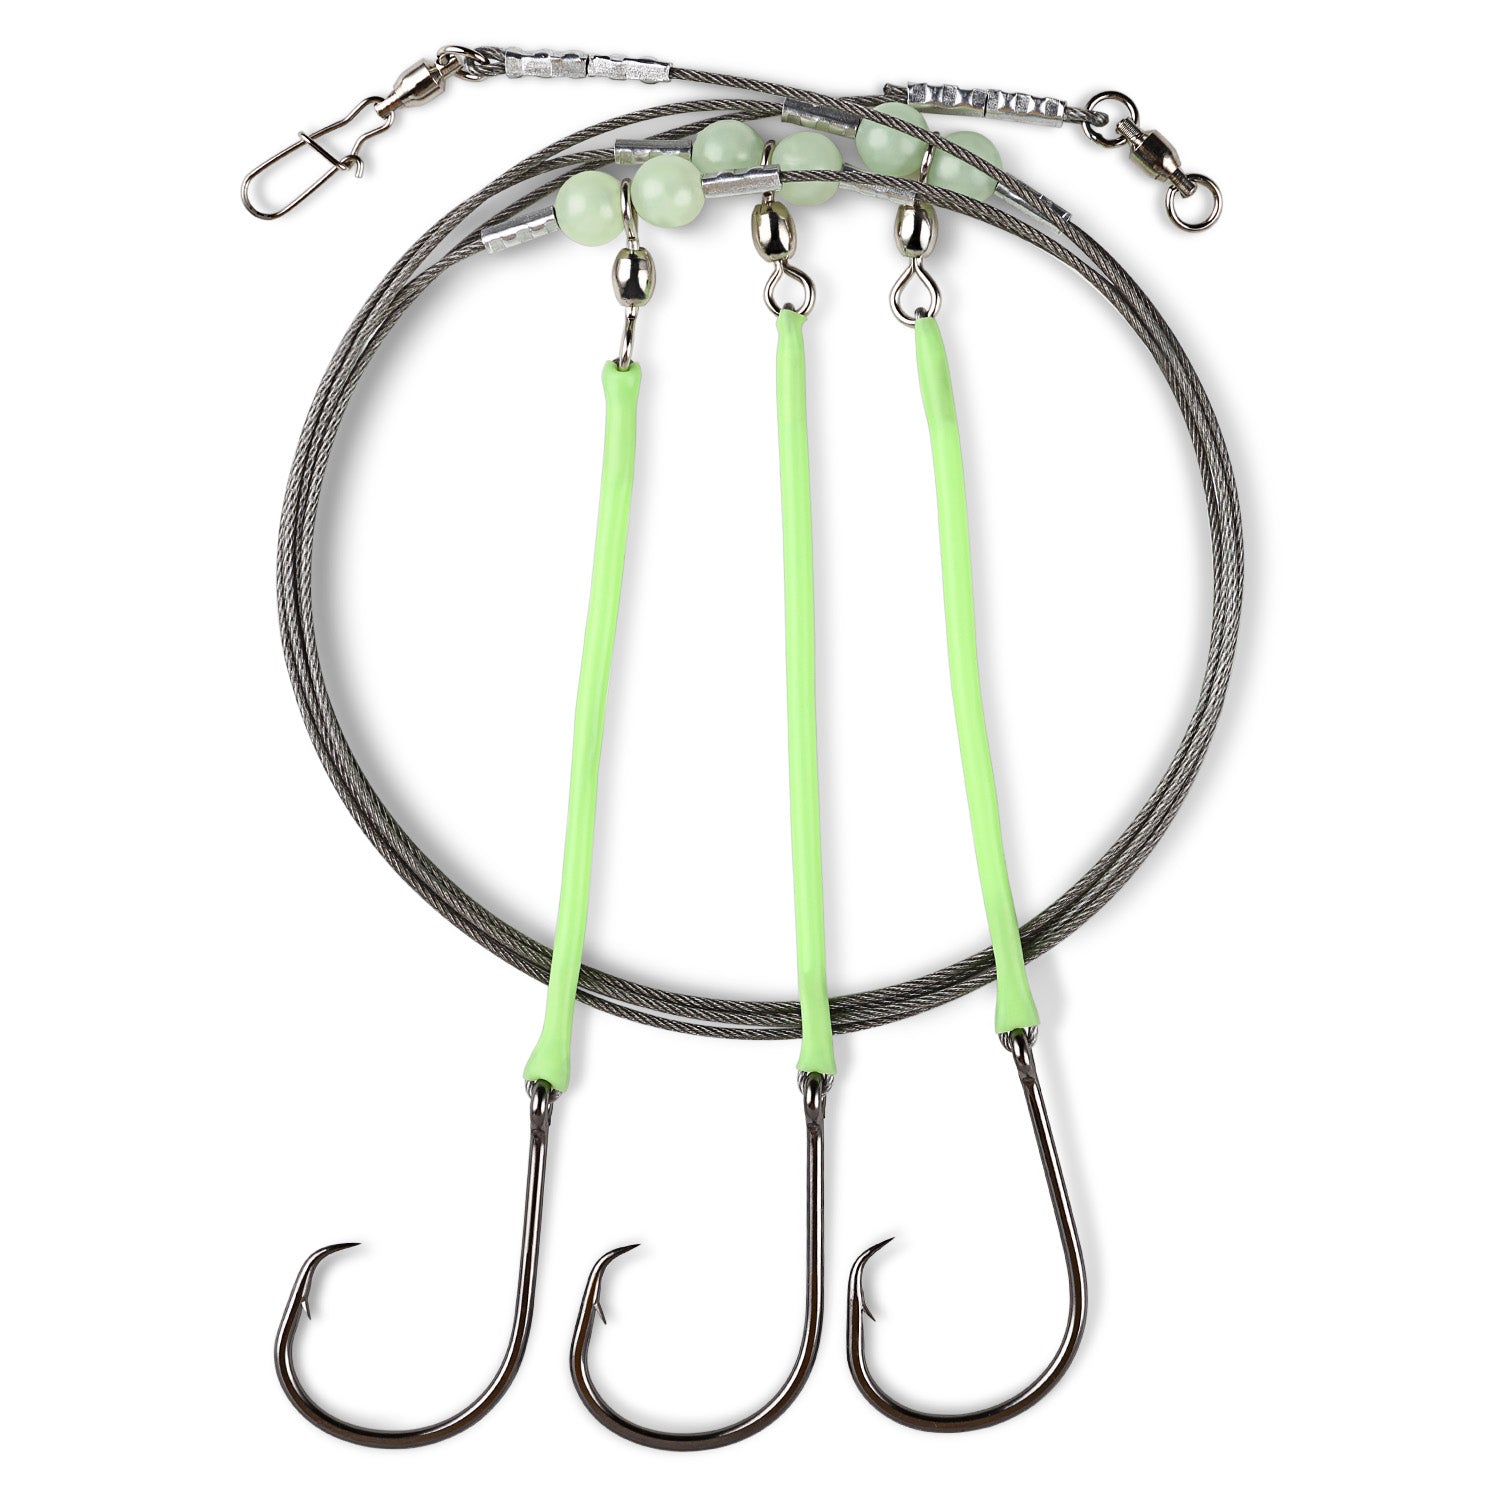 3 x 150 lb MONO SEA FISHING RIGS 10/0 SNELLED CIRCLE HOOK TOPE